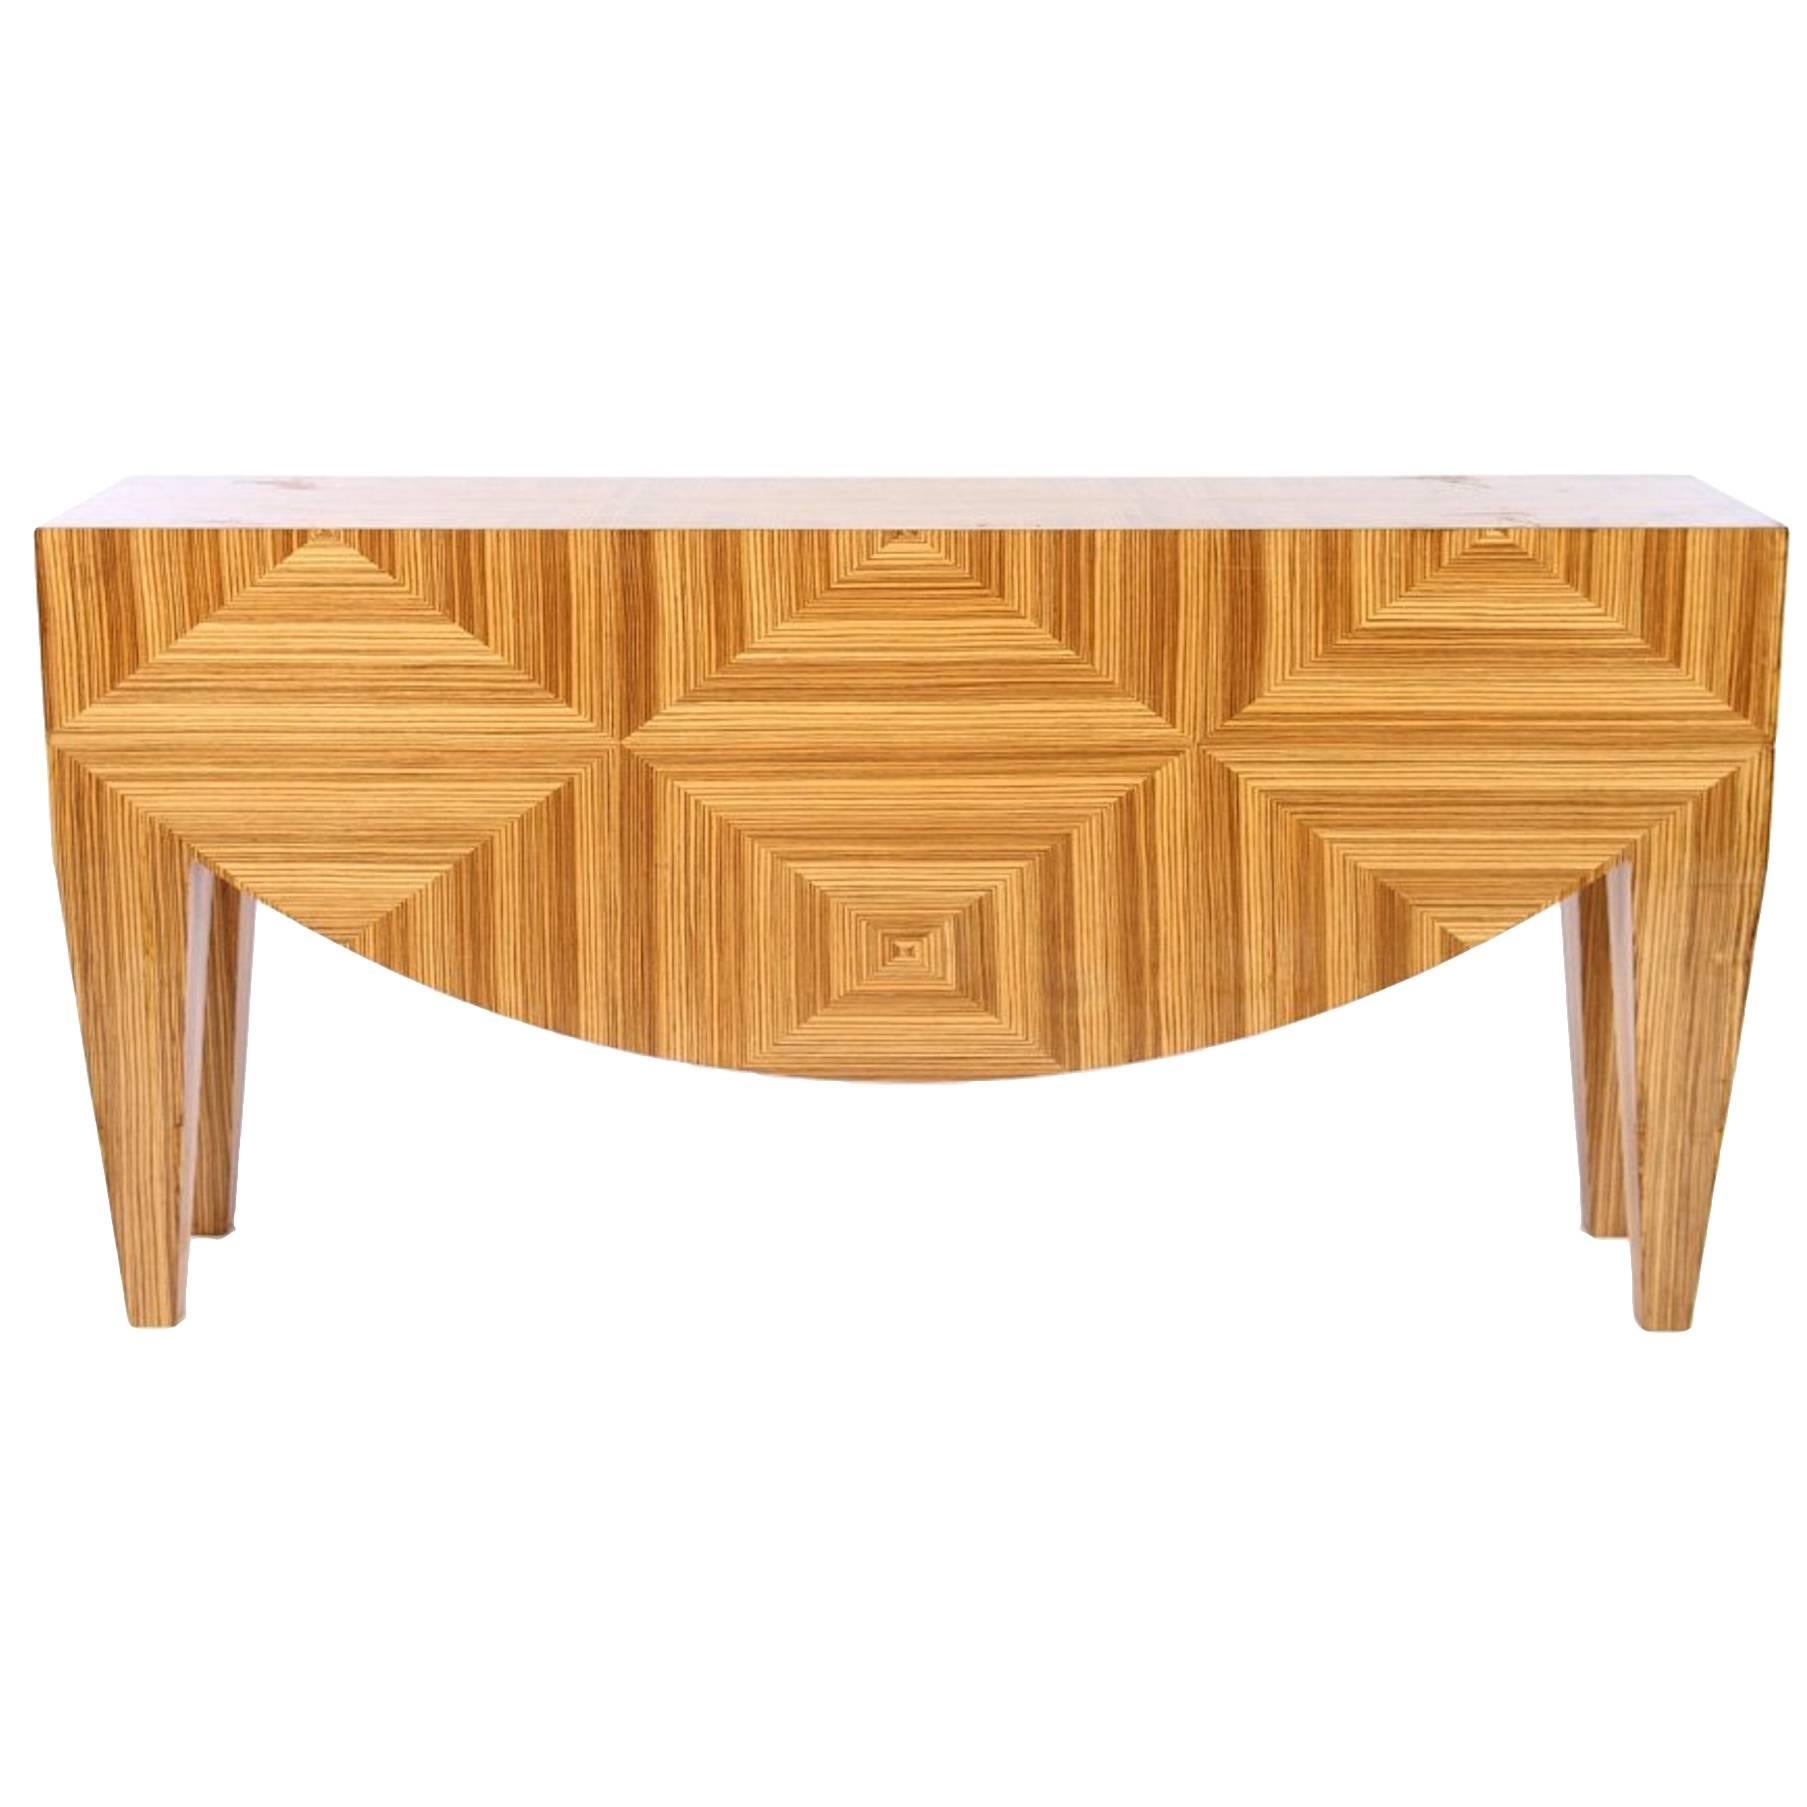 Post-Modern figured wood parquetry design console table; Exotic wood demilune apron front and tapered legs. 

Dimensions: 36